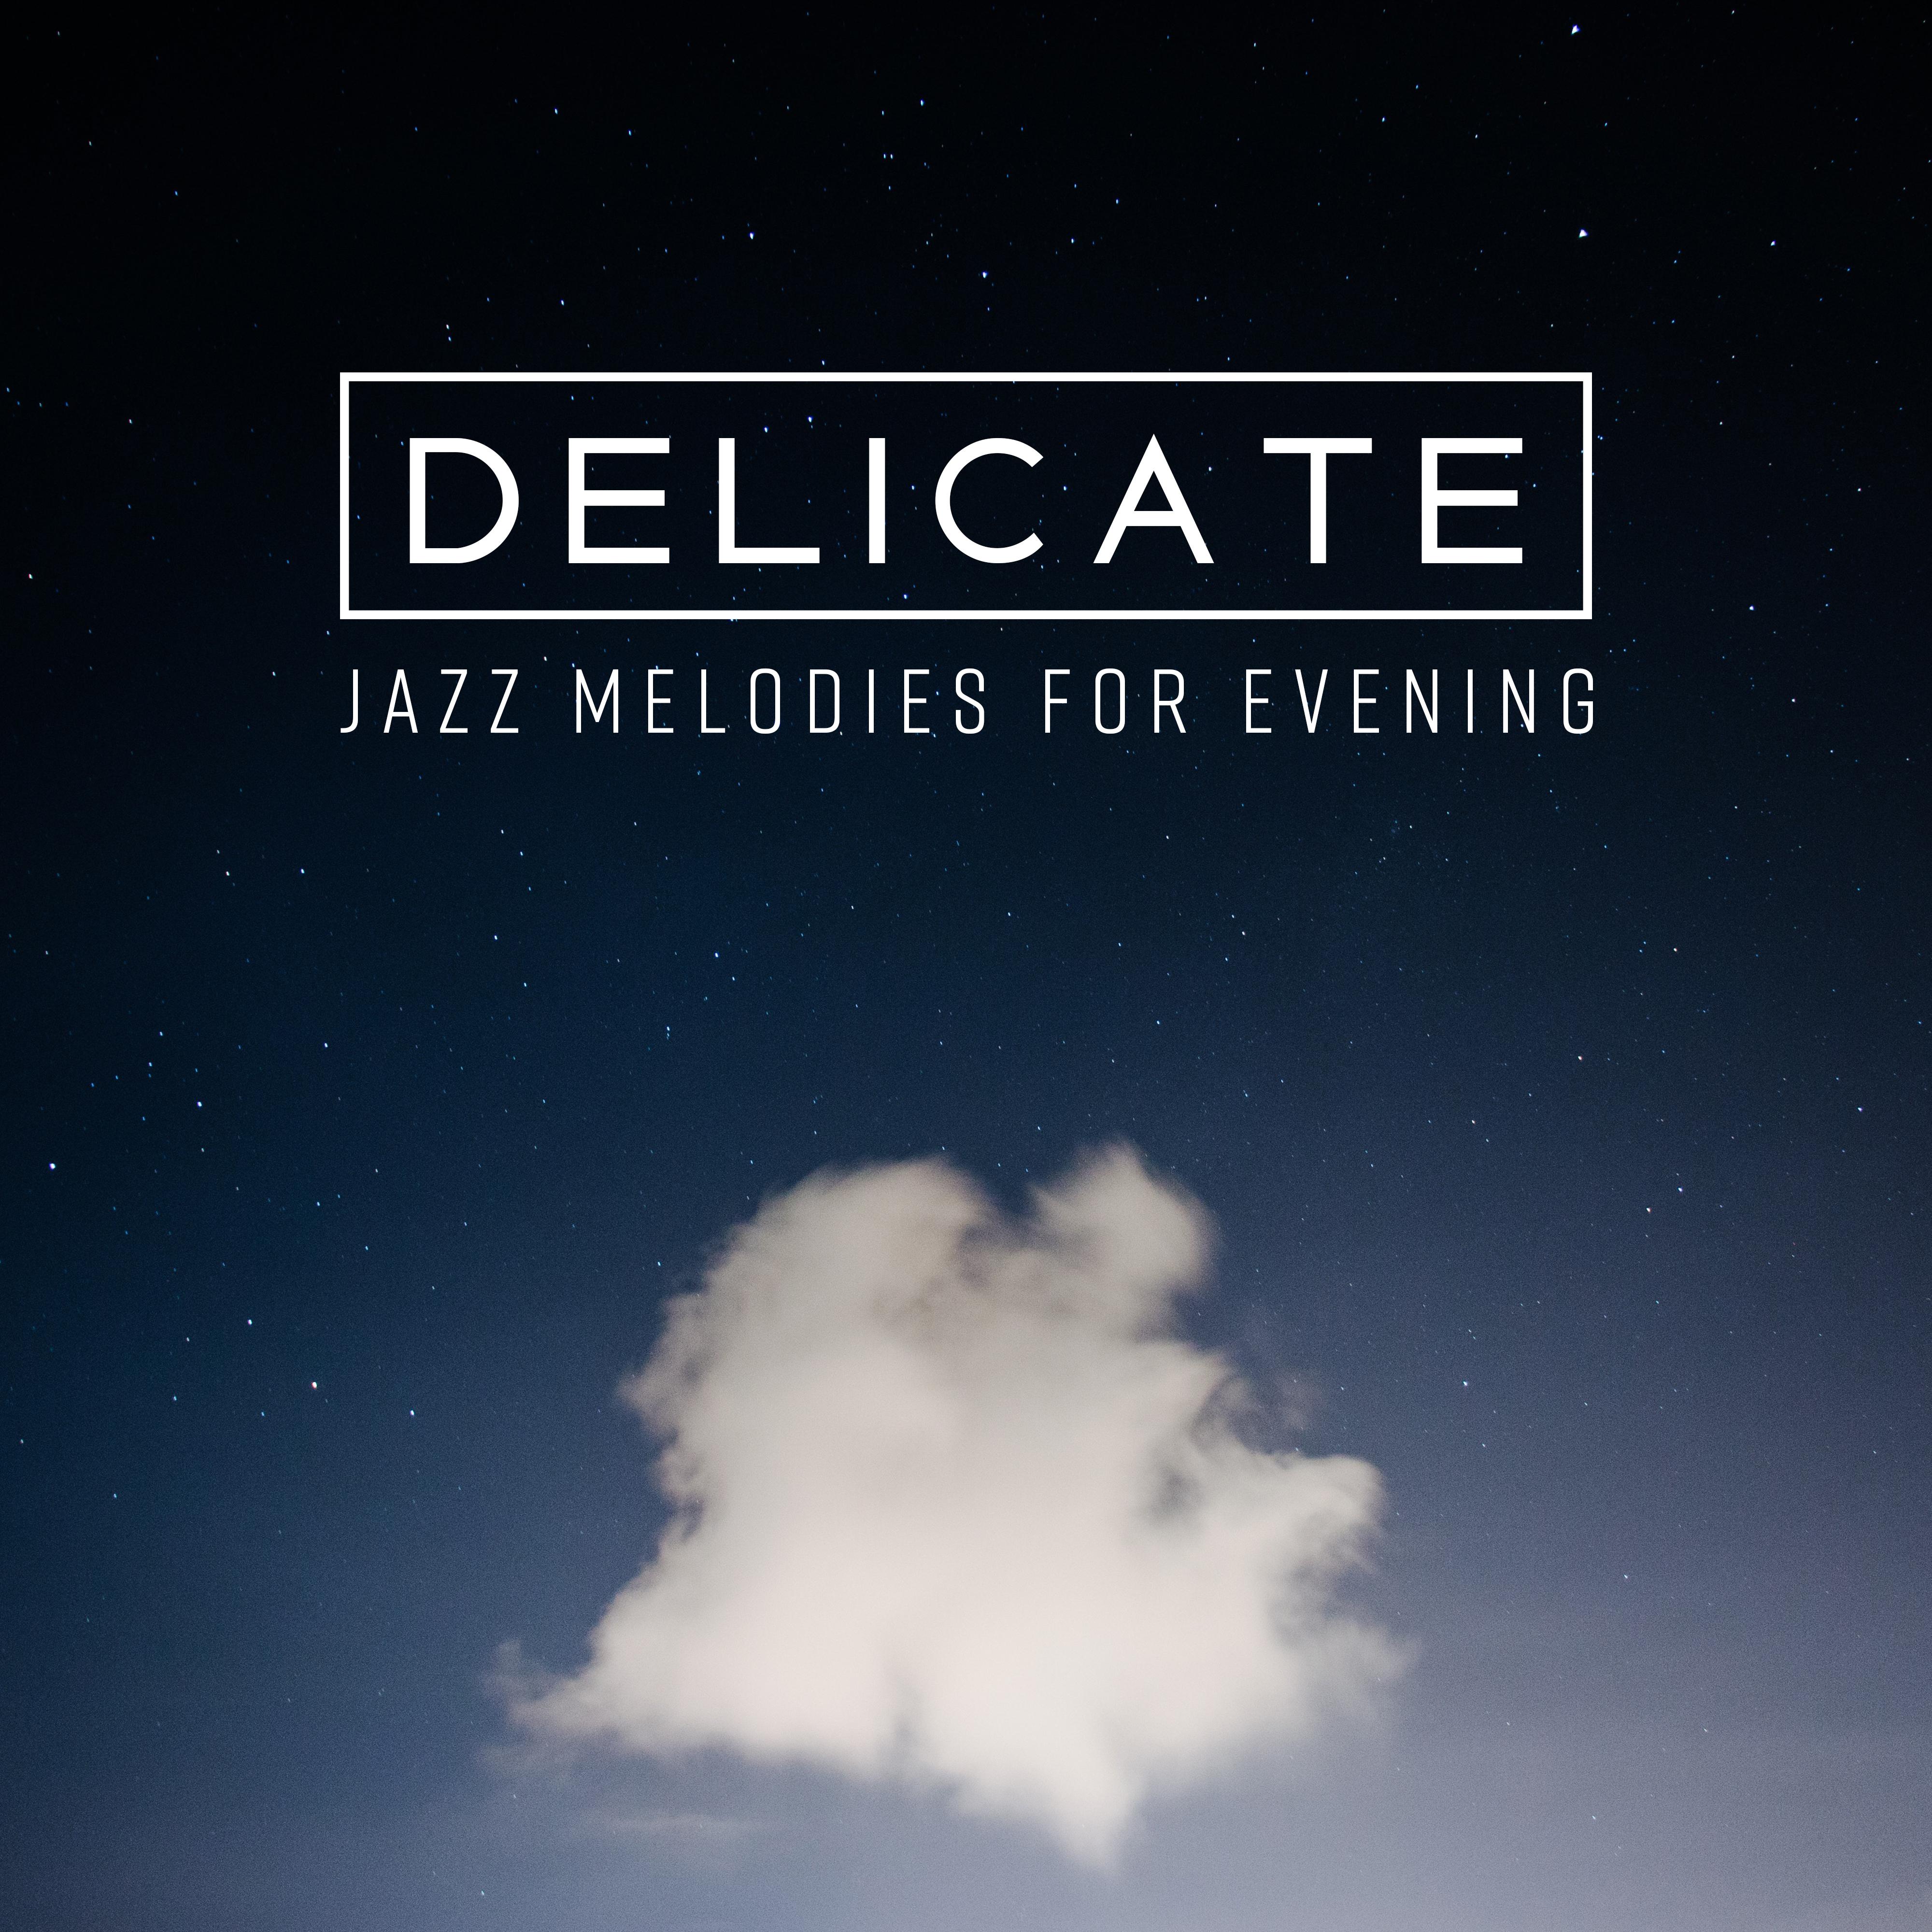 Delicate Jazz Melodies for Evening